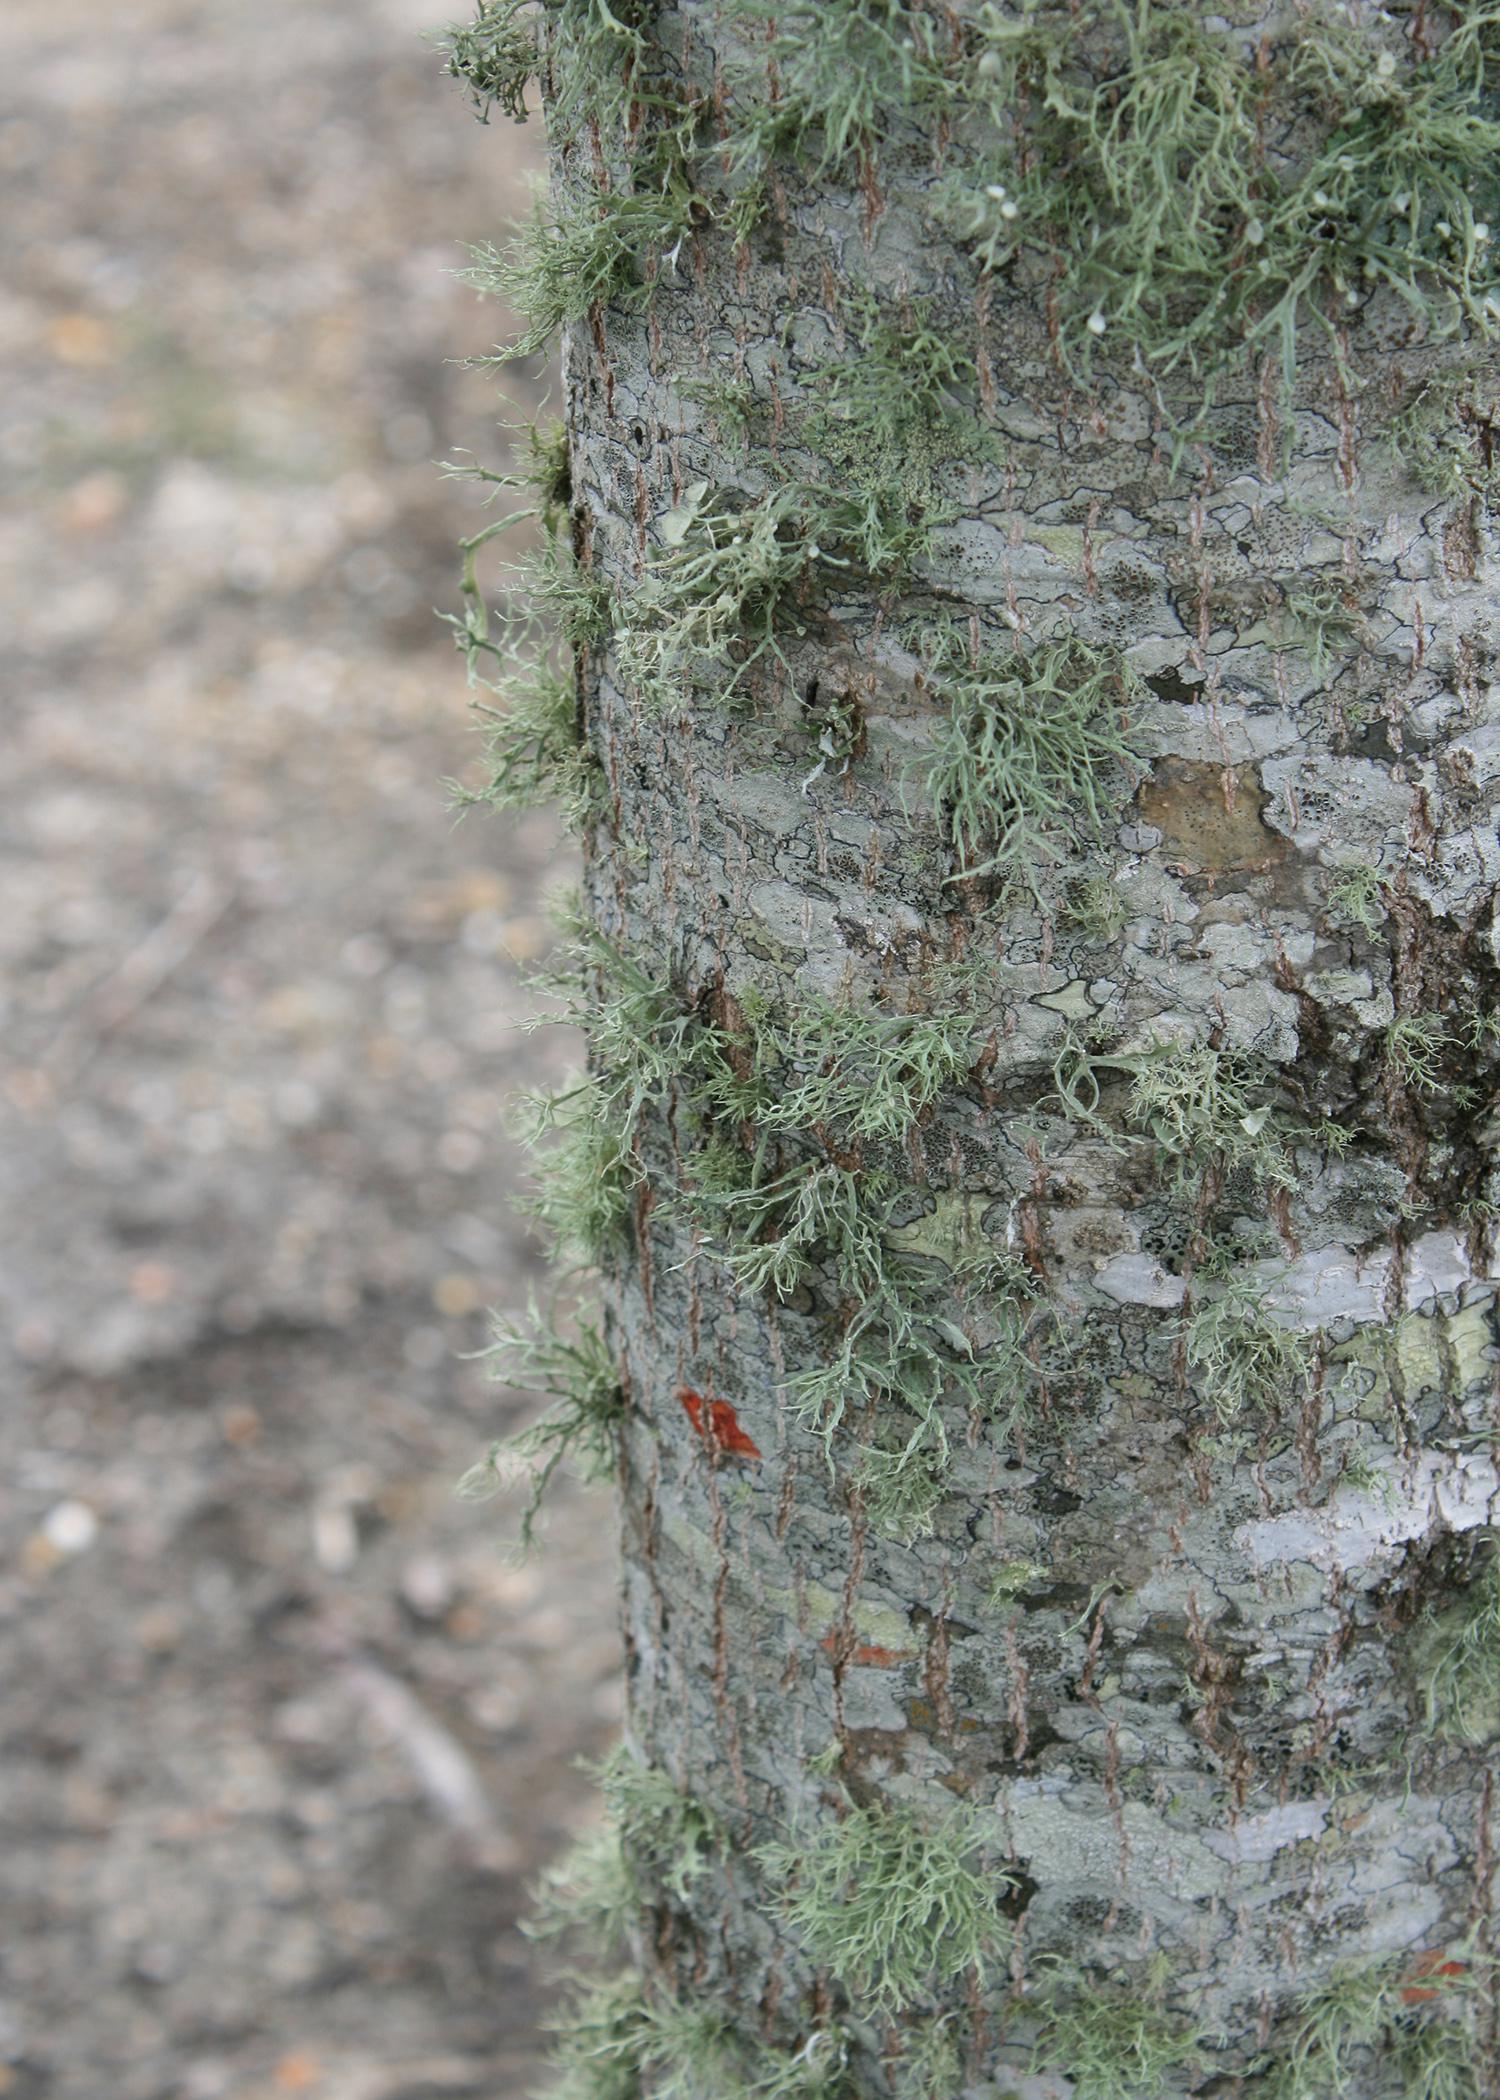 Lichens are harmless, opportunistic organisms that grow on hard outdoor surfaces, such as wooden fences, rocks and tree bark. A healthy plant has a canopy that discourages lichen growth. (Photo by MSU Extension Service/Gary Bachman)